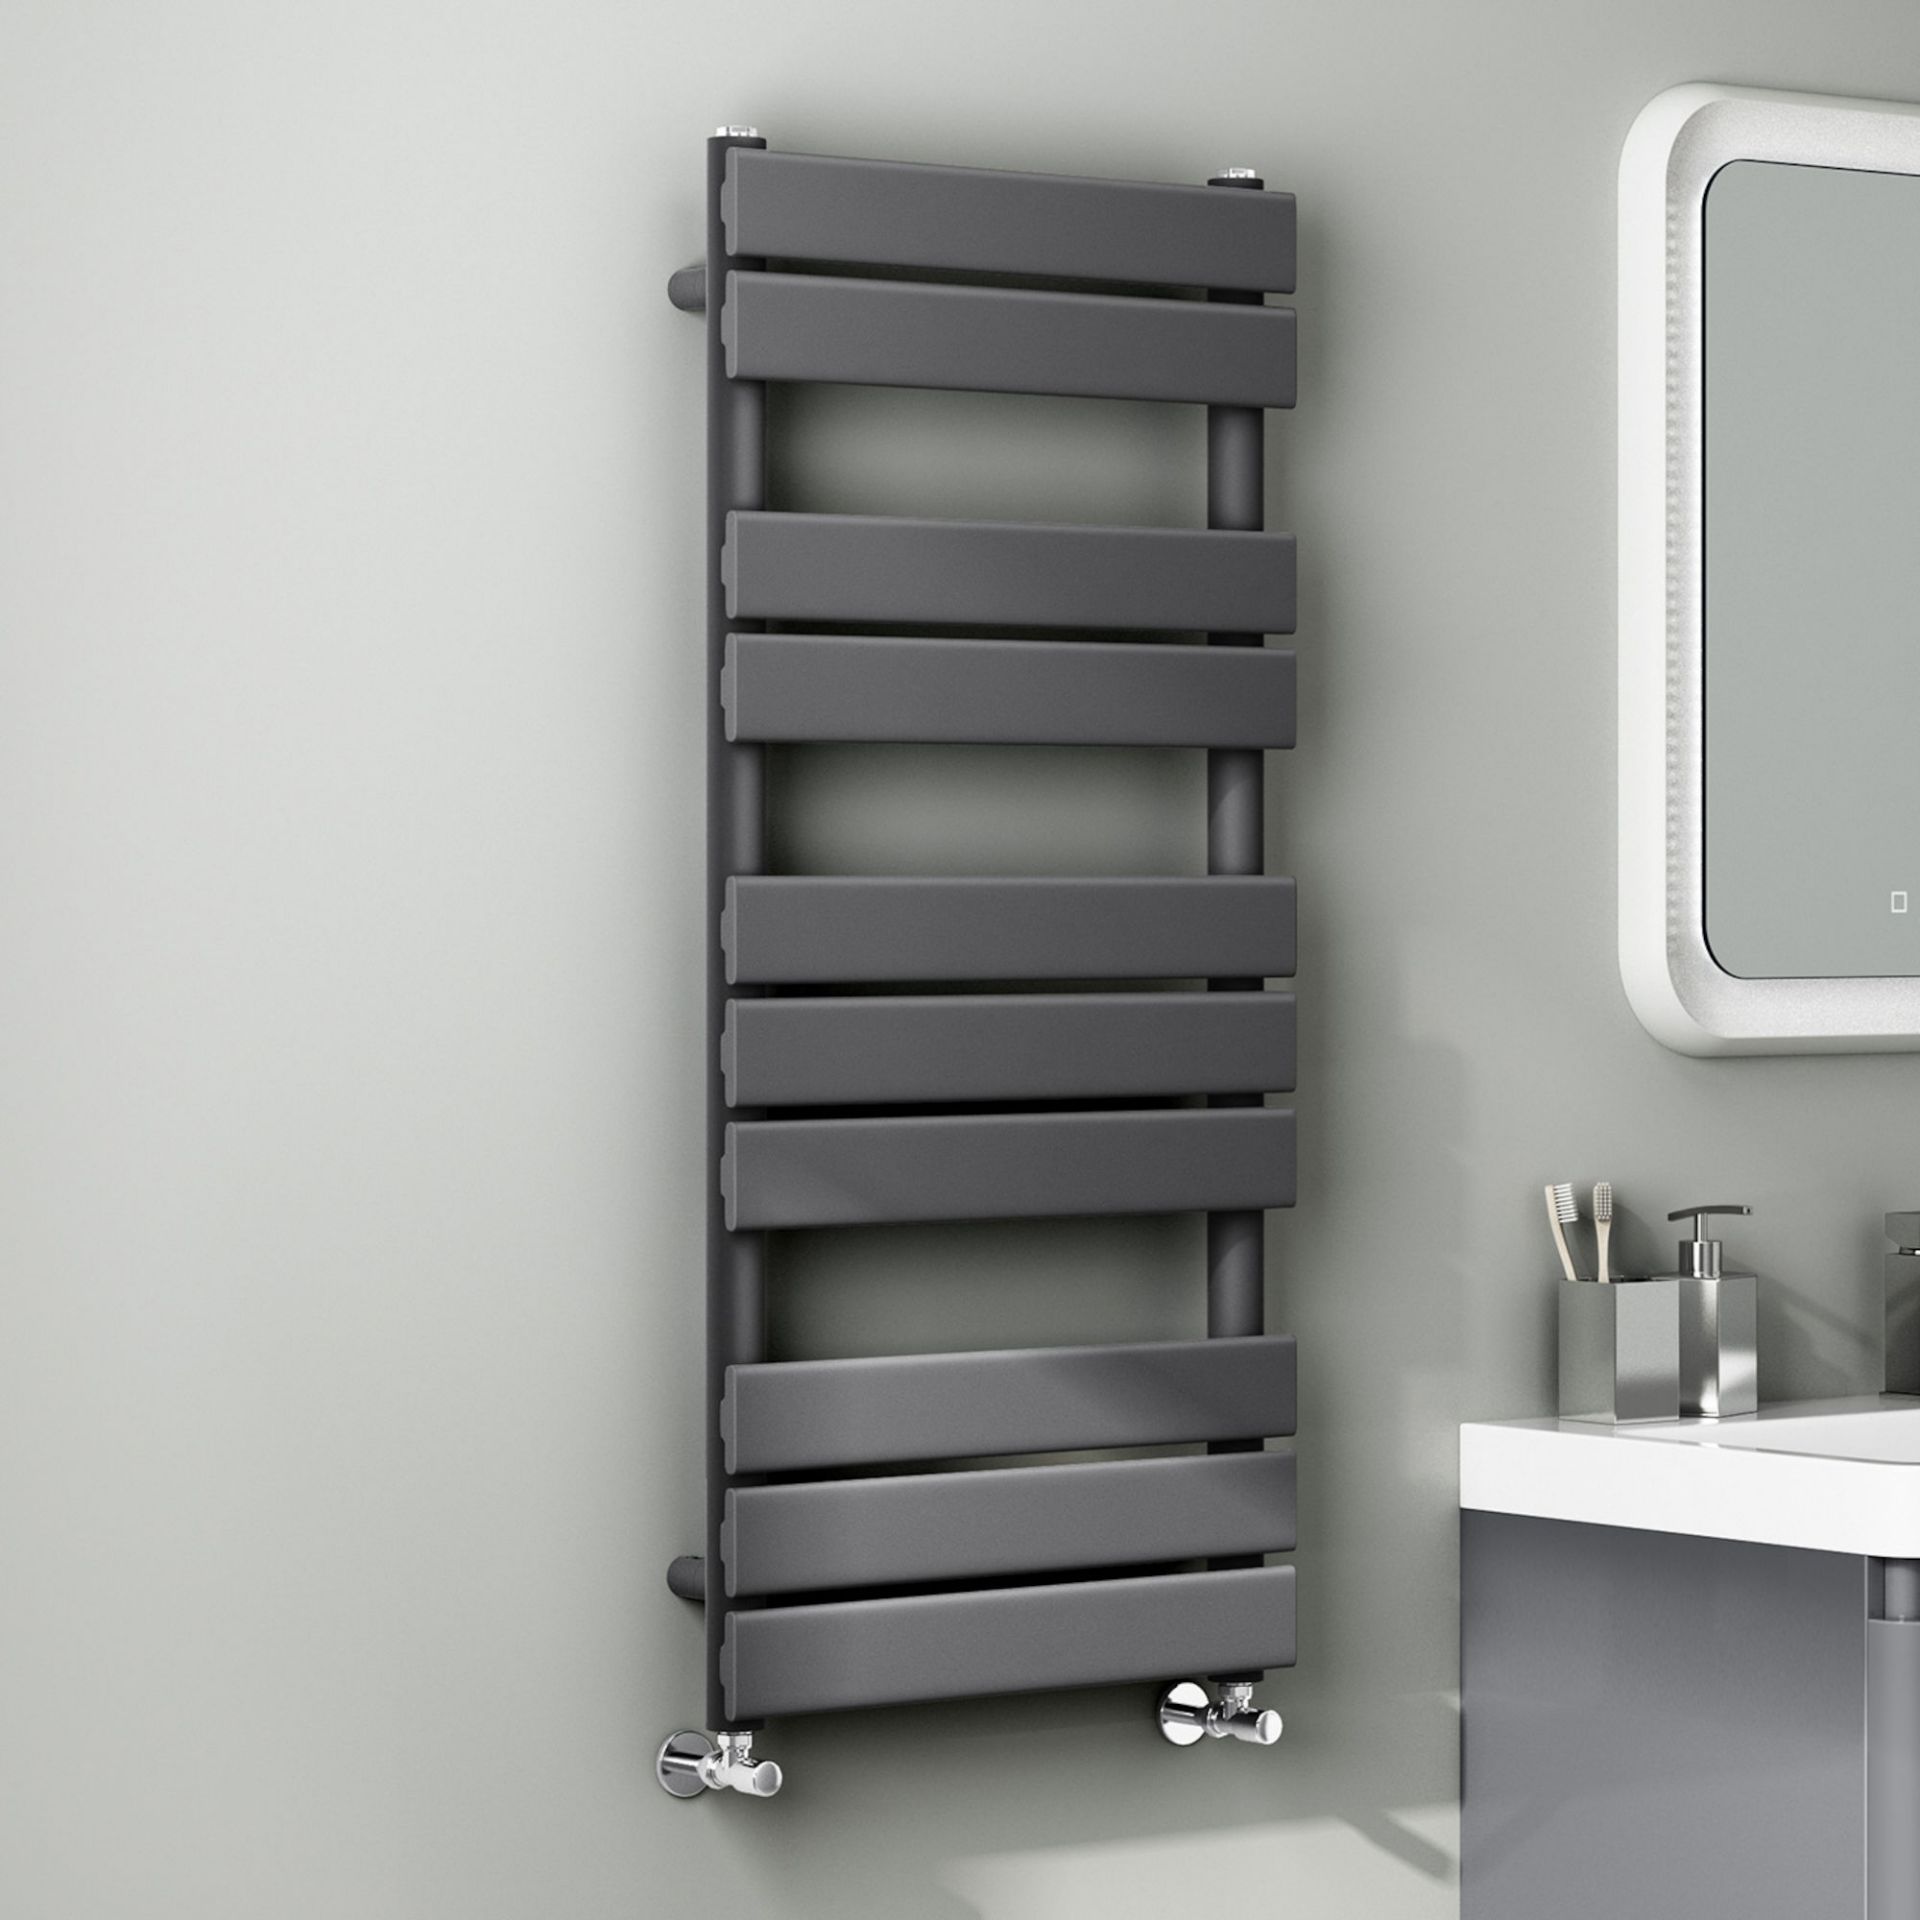 (G25) 1000x450mm Anthracite Flat Panel Ladder Towel Radiator. RRP £259.99. Made with low carbo...